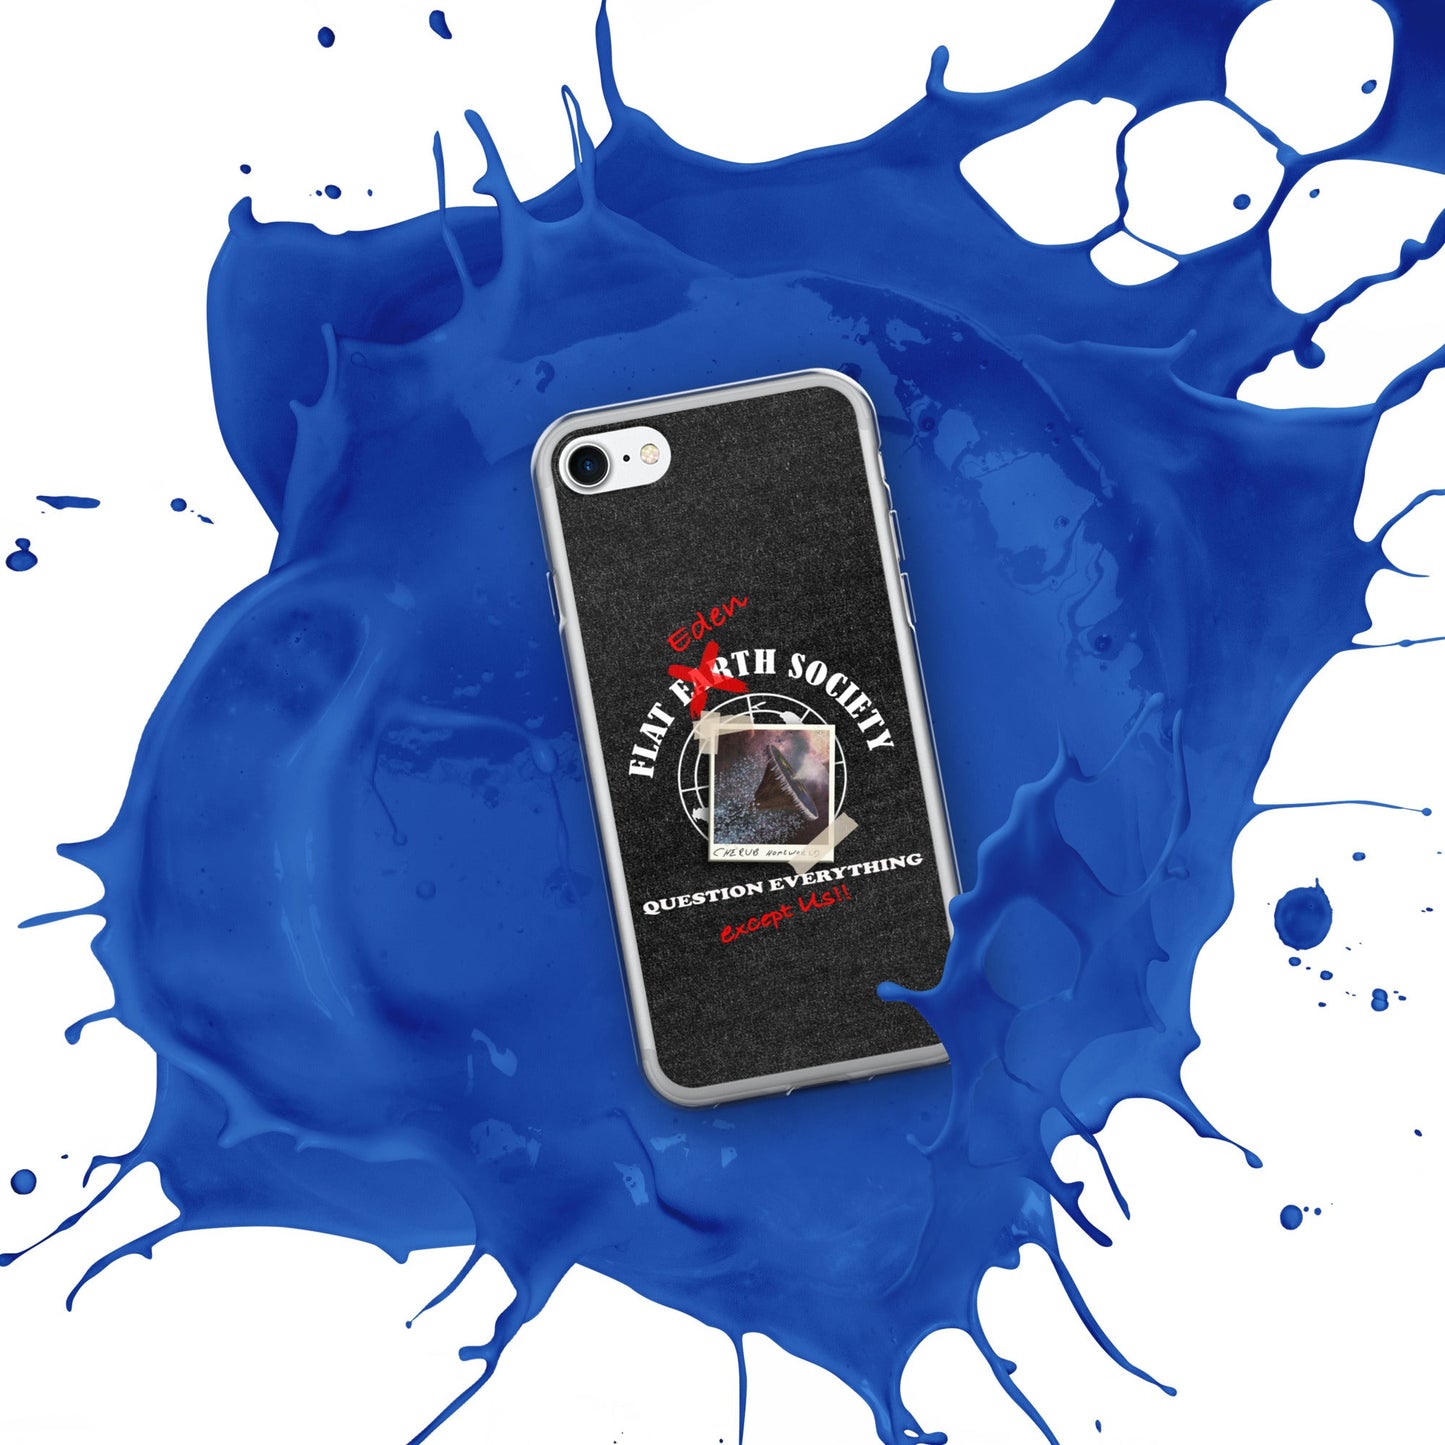 iPhone Case | Intergalactic Space Force 2 | Flat Eden Society - Spectral Ink Shop - Mobile Phone Cases -9780728_7910